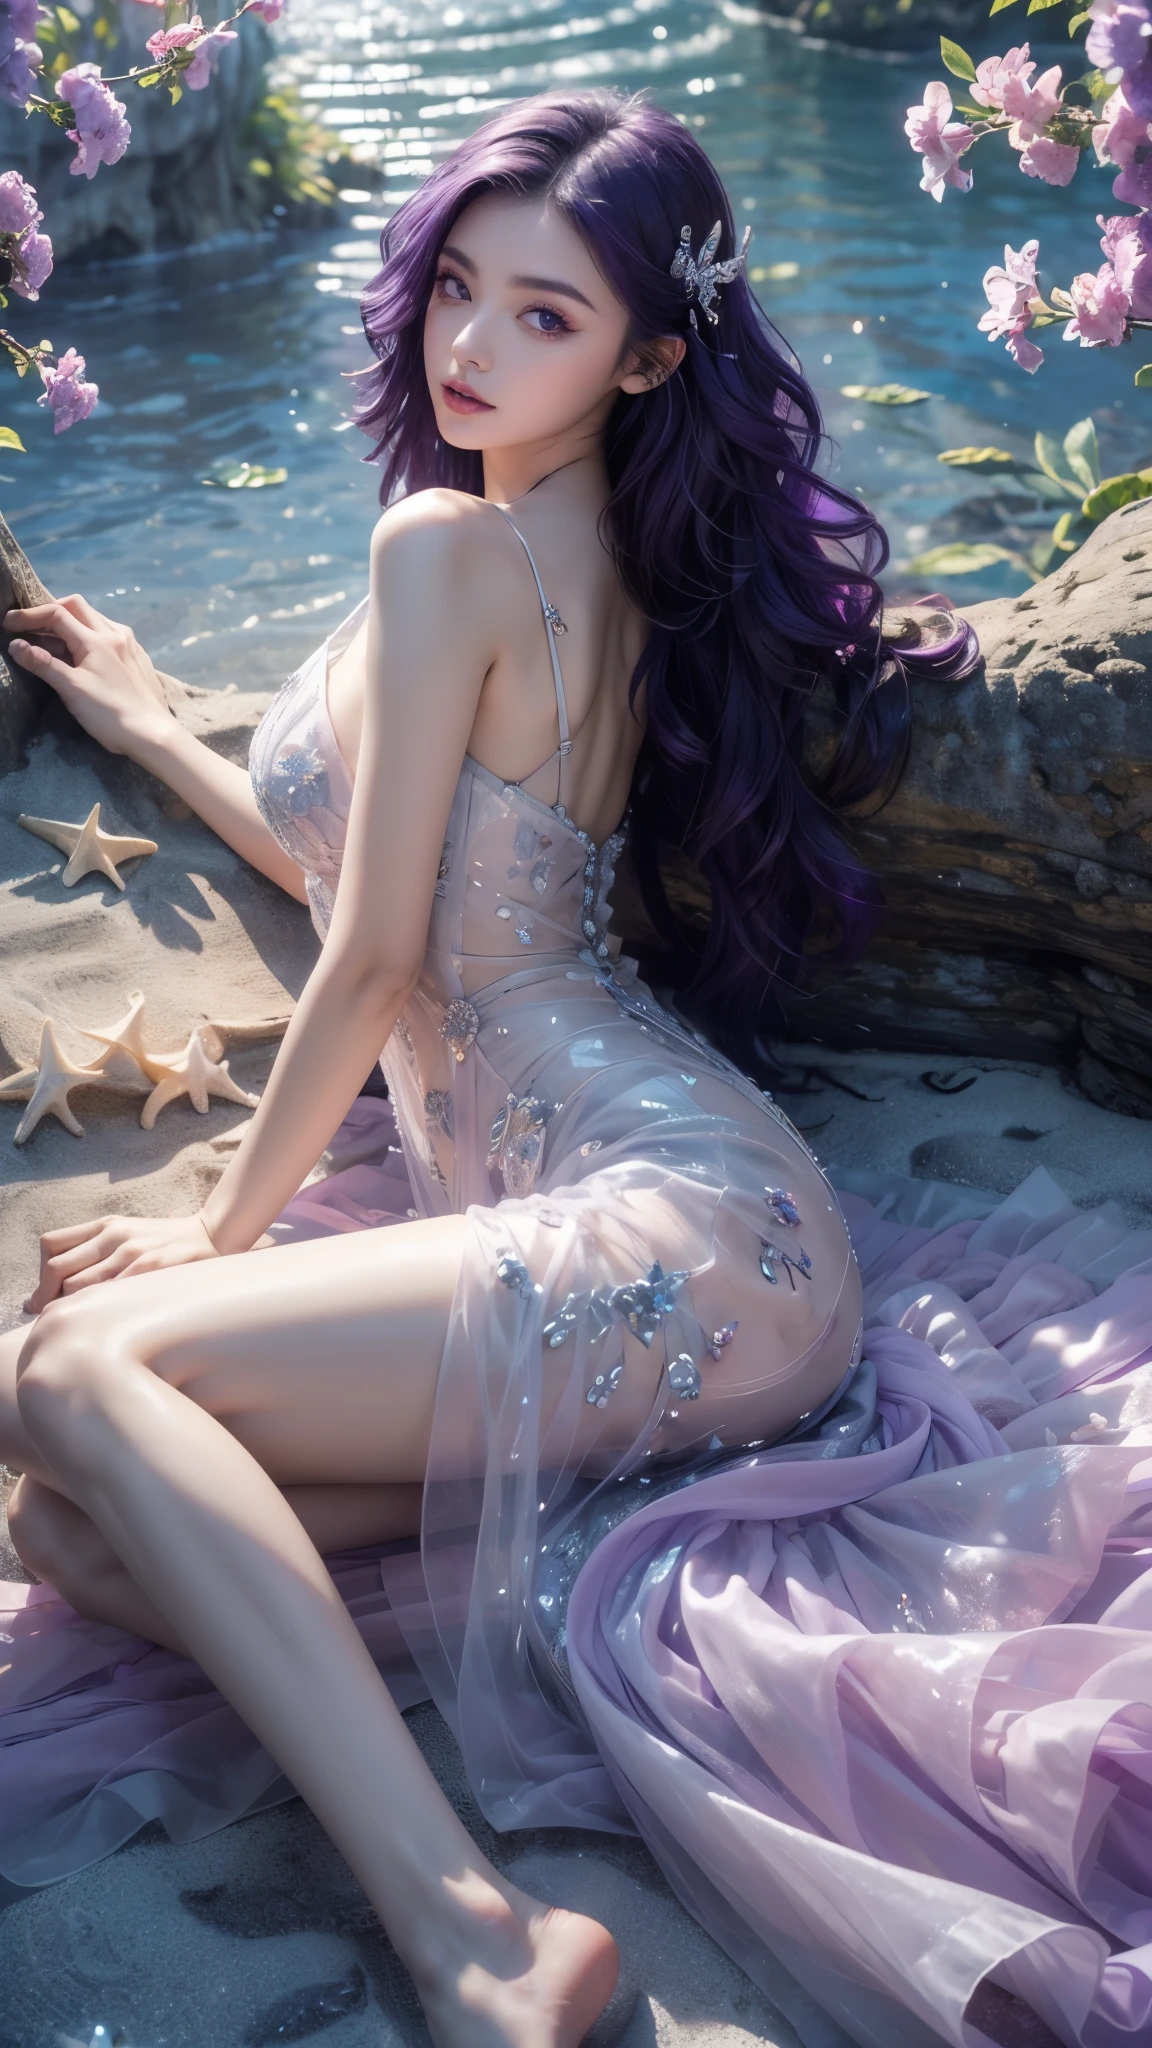 (((RAW photo , Extremely detailed, highest quality, High resolution, alone,)))

break、(contrast:1),  whole body、 Viewed from directly above, Lying in a flower garden, back is on the floor、

break、 (((purple hair beach wave hairstyle ))), (((cosmetics))),big breasts,

break、white effect, white wings:1.2 ,  White Angel:1.2, ((night)) 、

break、Vampire Castle, detailed background,, moon、 

break、antonio riva dress:1.1,Dress made of slightly see-through fabric:1.3、(very complicated:1.2), high fantasy, beautiful face,  pointed ears, 

break,background, monochrome, grayscale, barefoot, break、outdoors、river